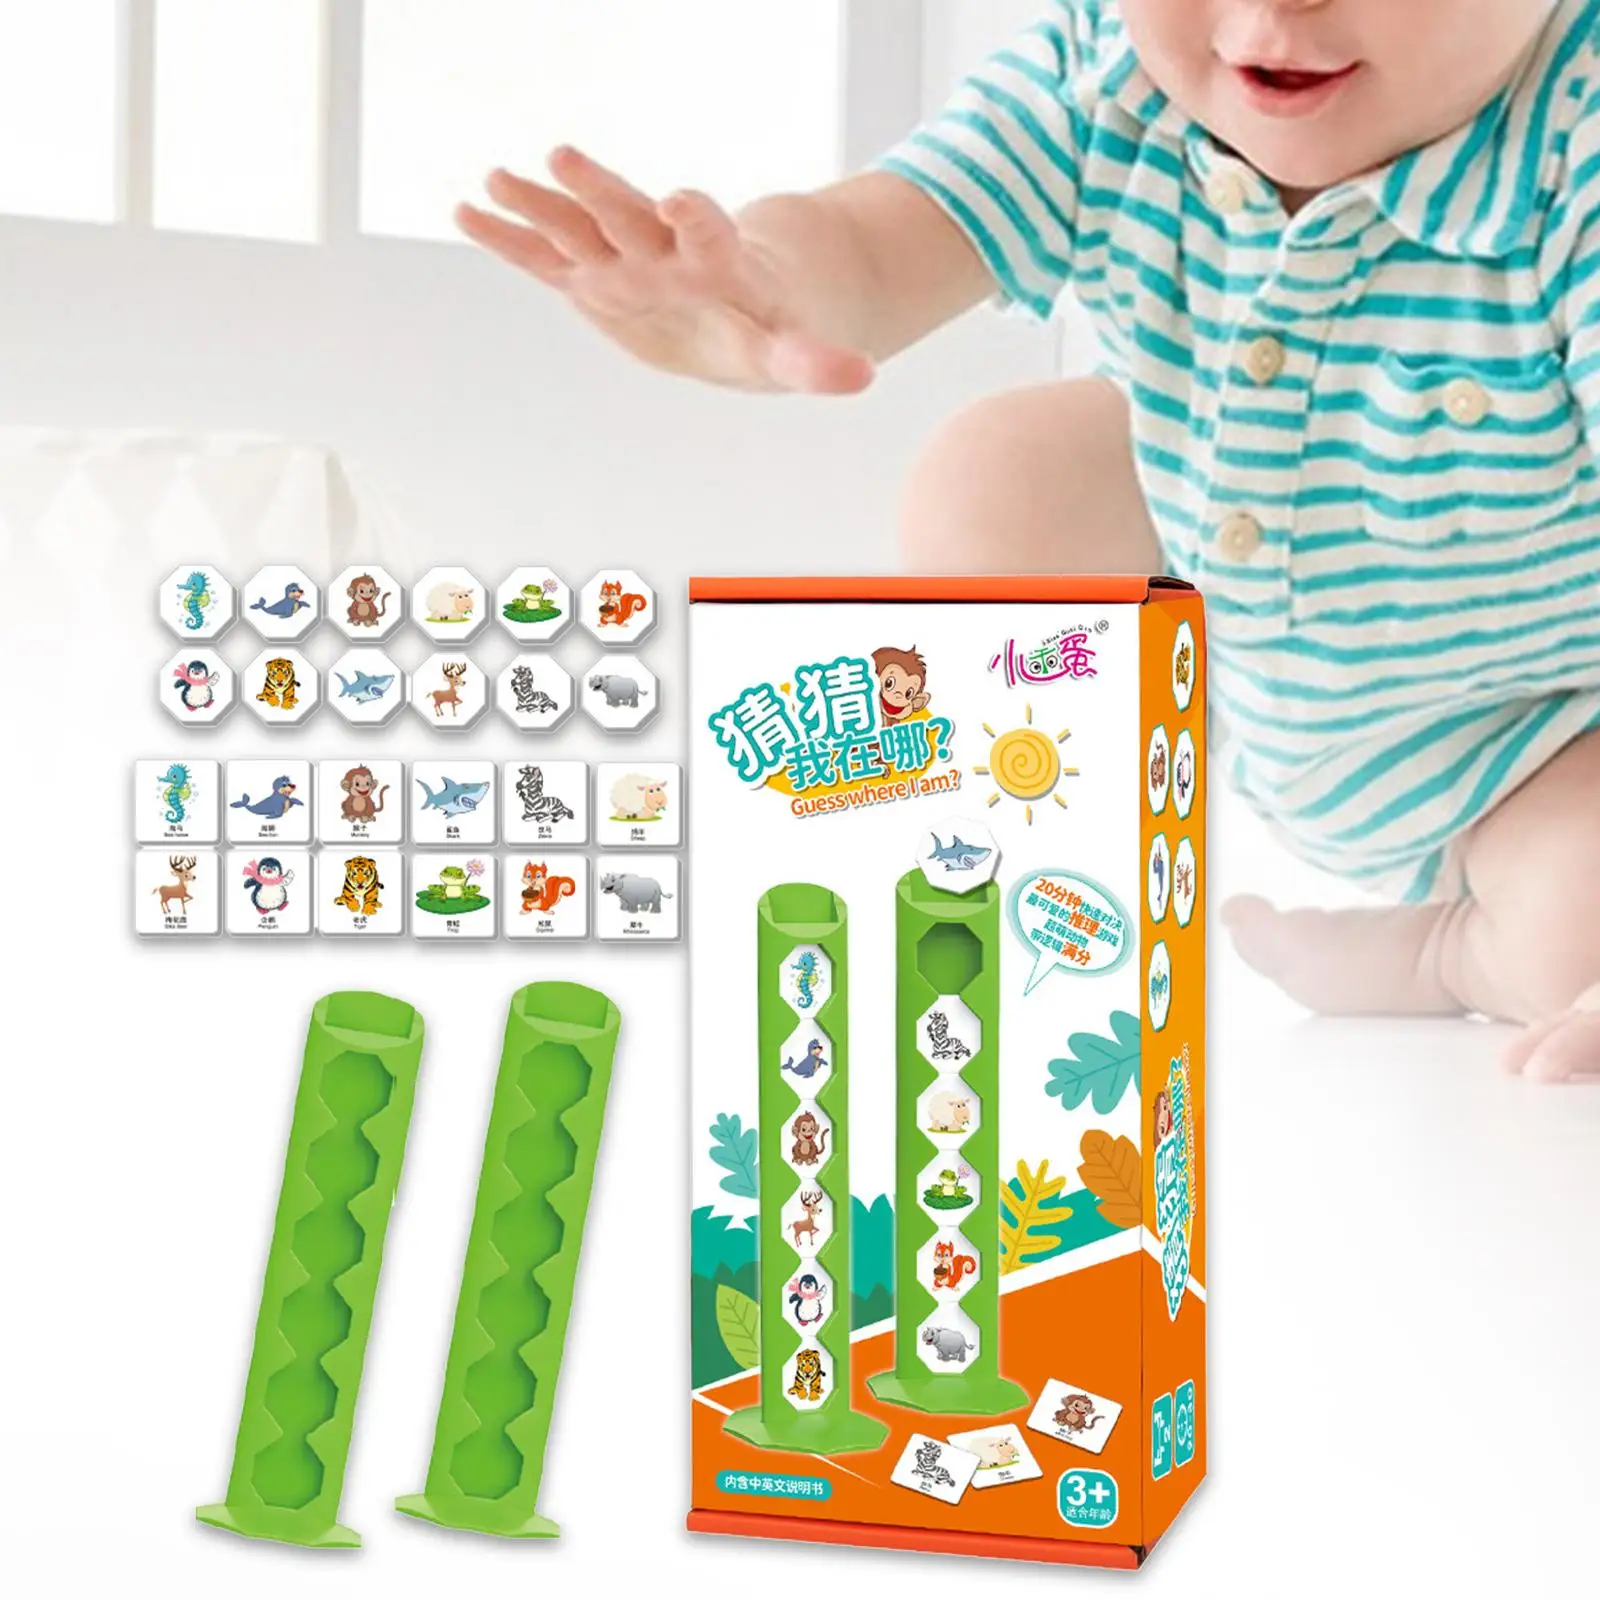 Guessing Game Novelty Parent Child Interaction Detective Interactive Toy Game for Gifts Family Game Children Girls Boys